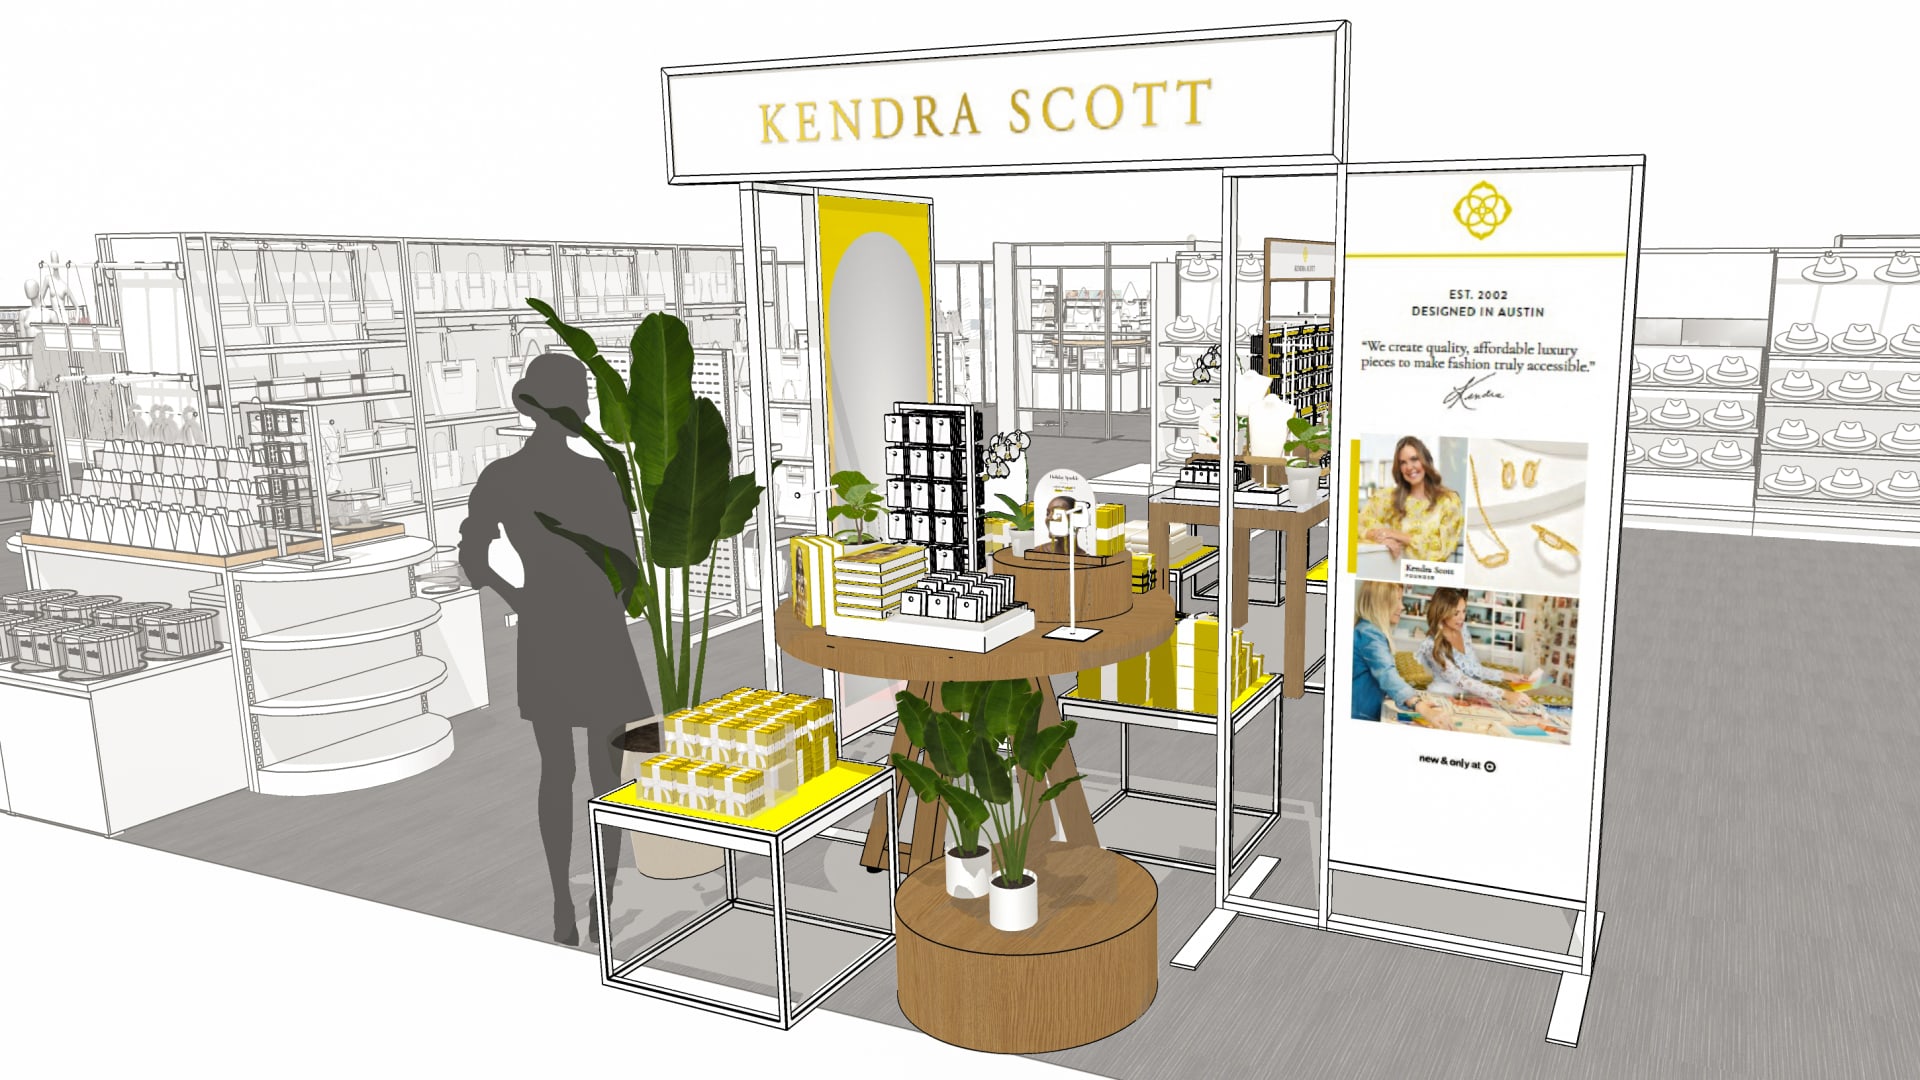 Target strikes deal with jeweler Kendra Scott as it gets ready for holiday season